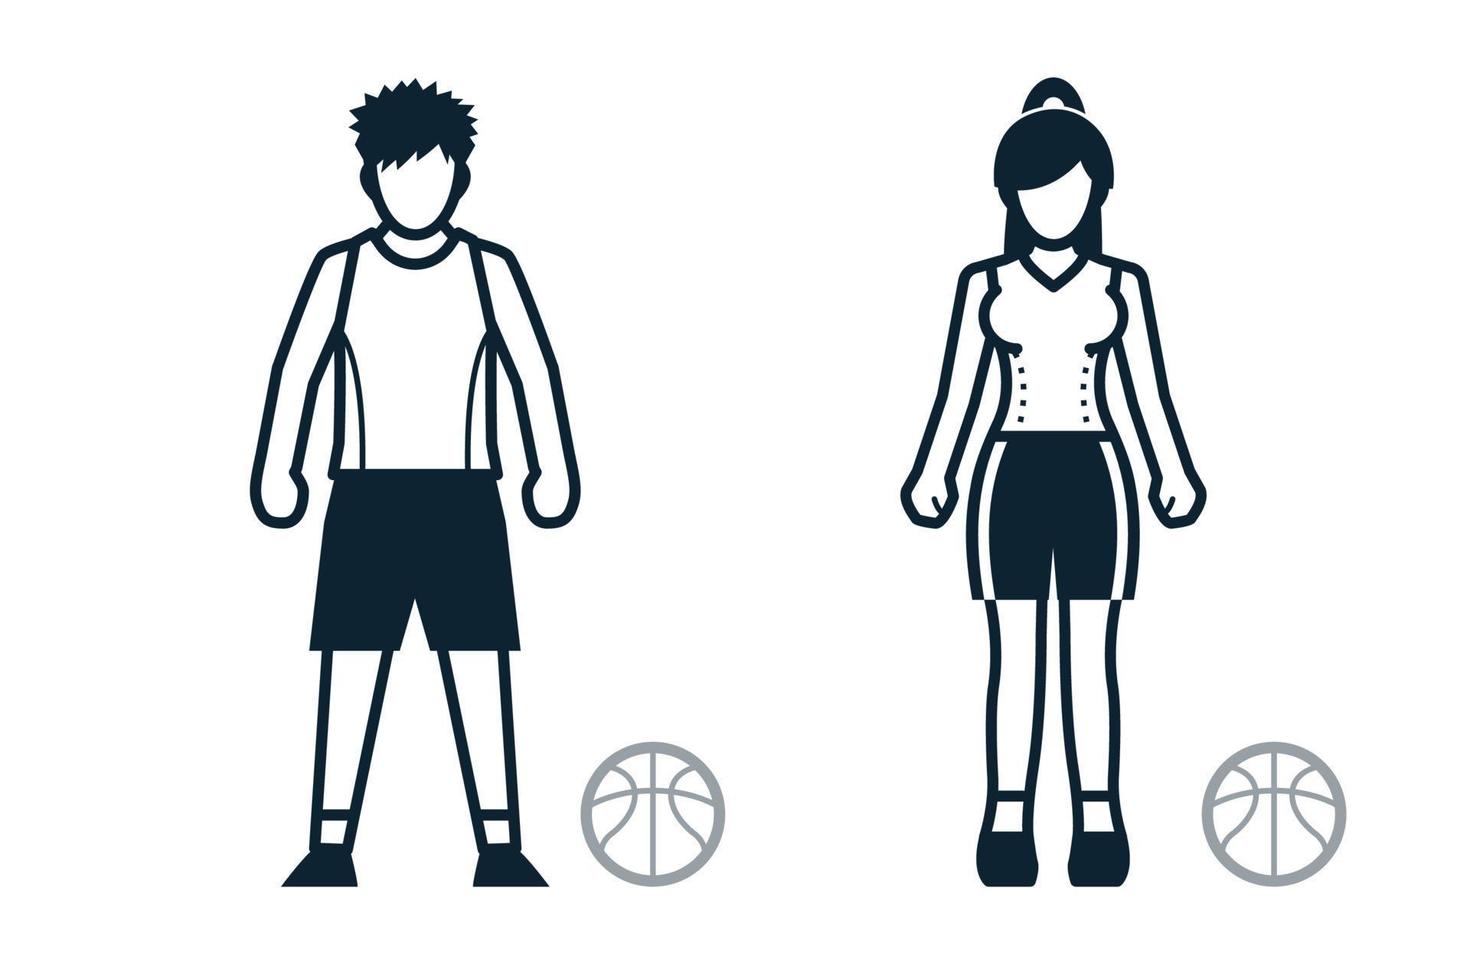 Basketball, Sport Player, People and Clothing icons with White Background vector